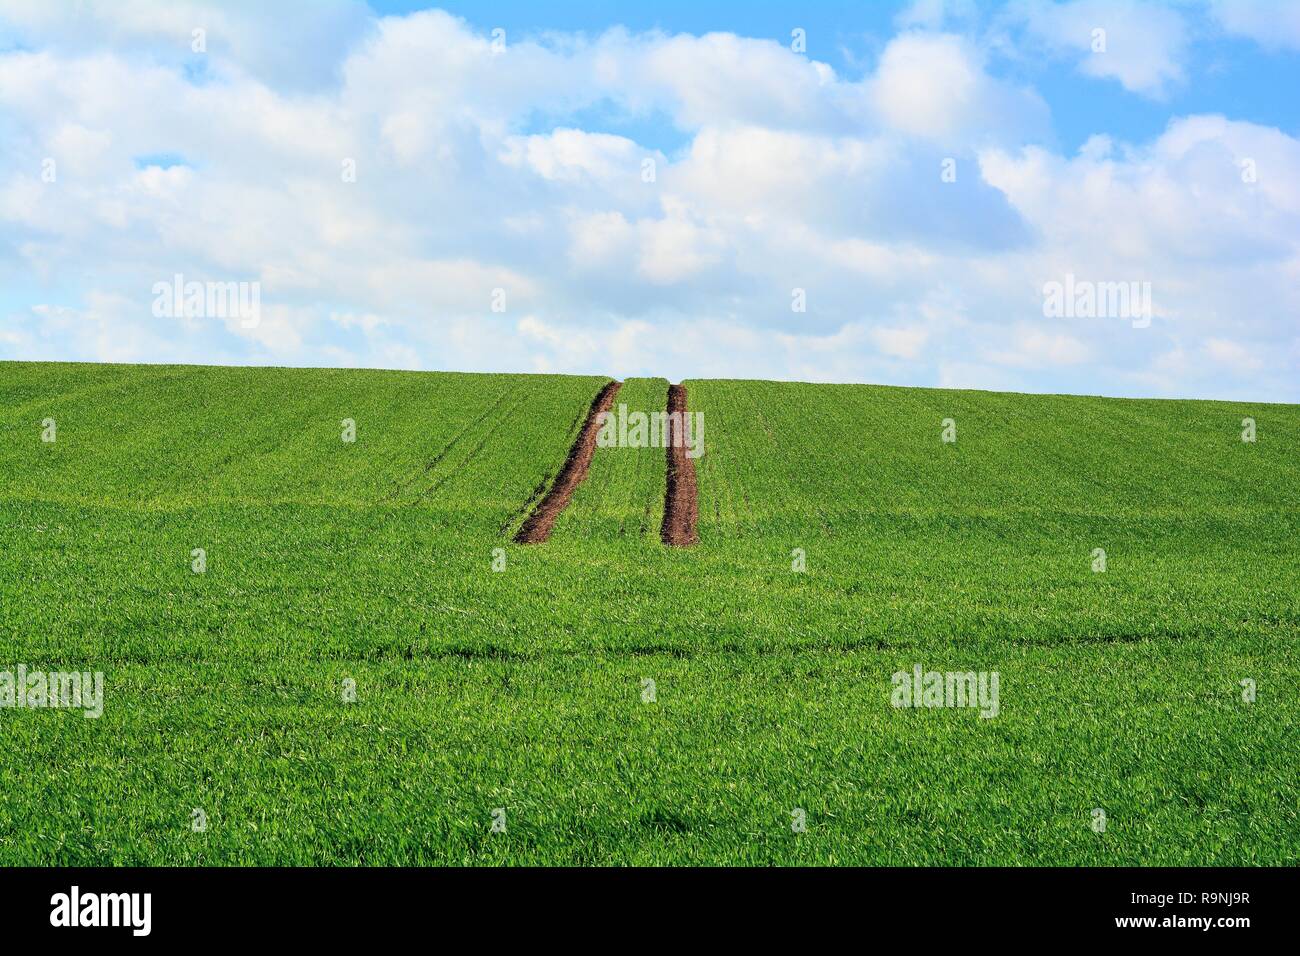 Tire track of a tractor on a field Stock Photo